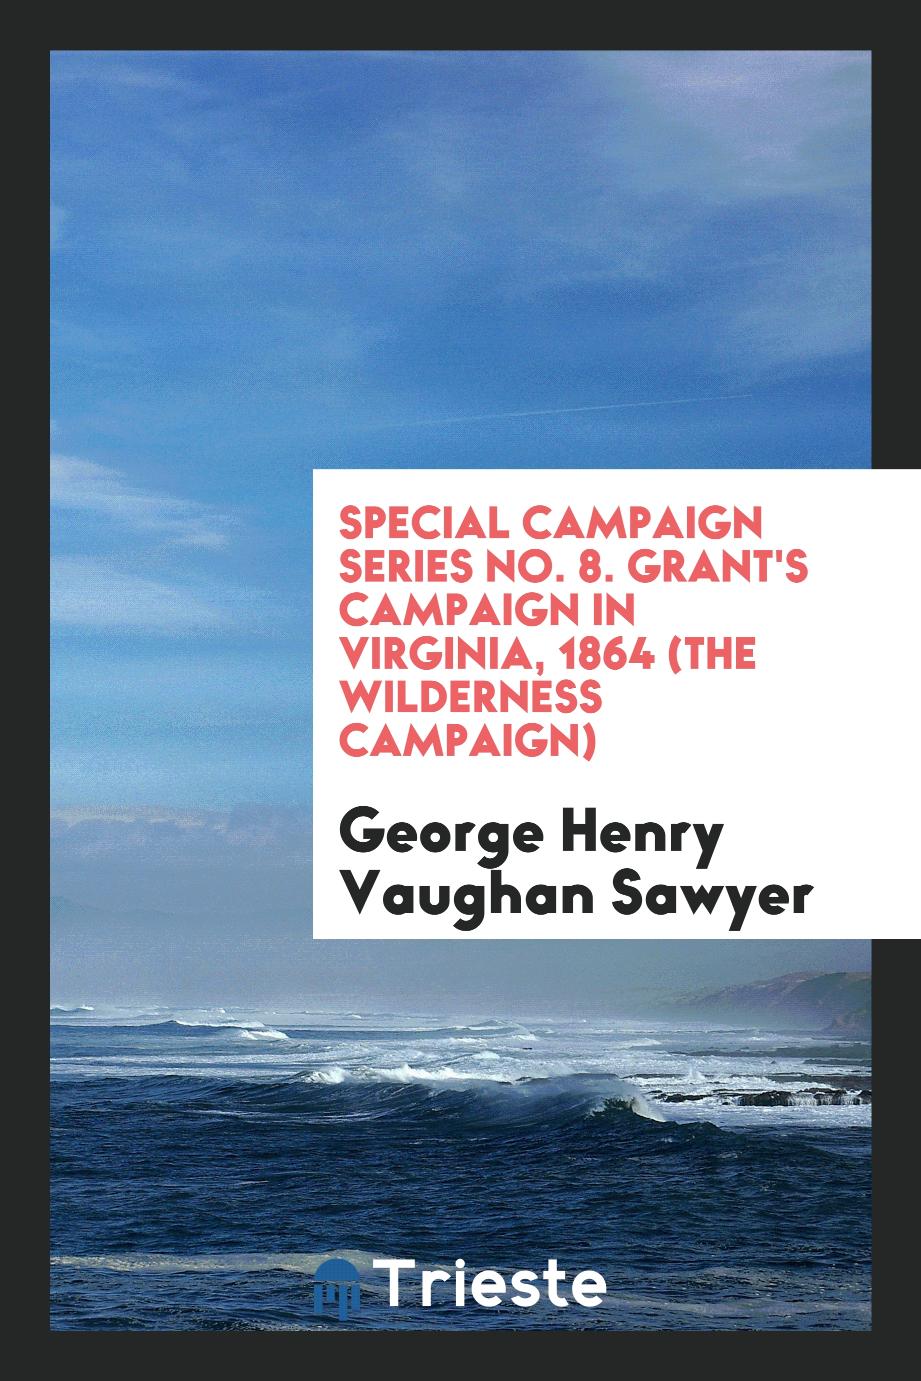 Special campaign series No. 8. Grant's campaign in Virginia, 1864 (the Wilderness campaign)